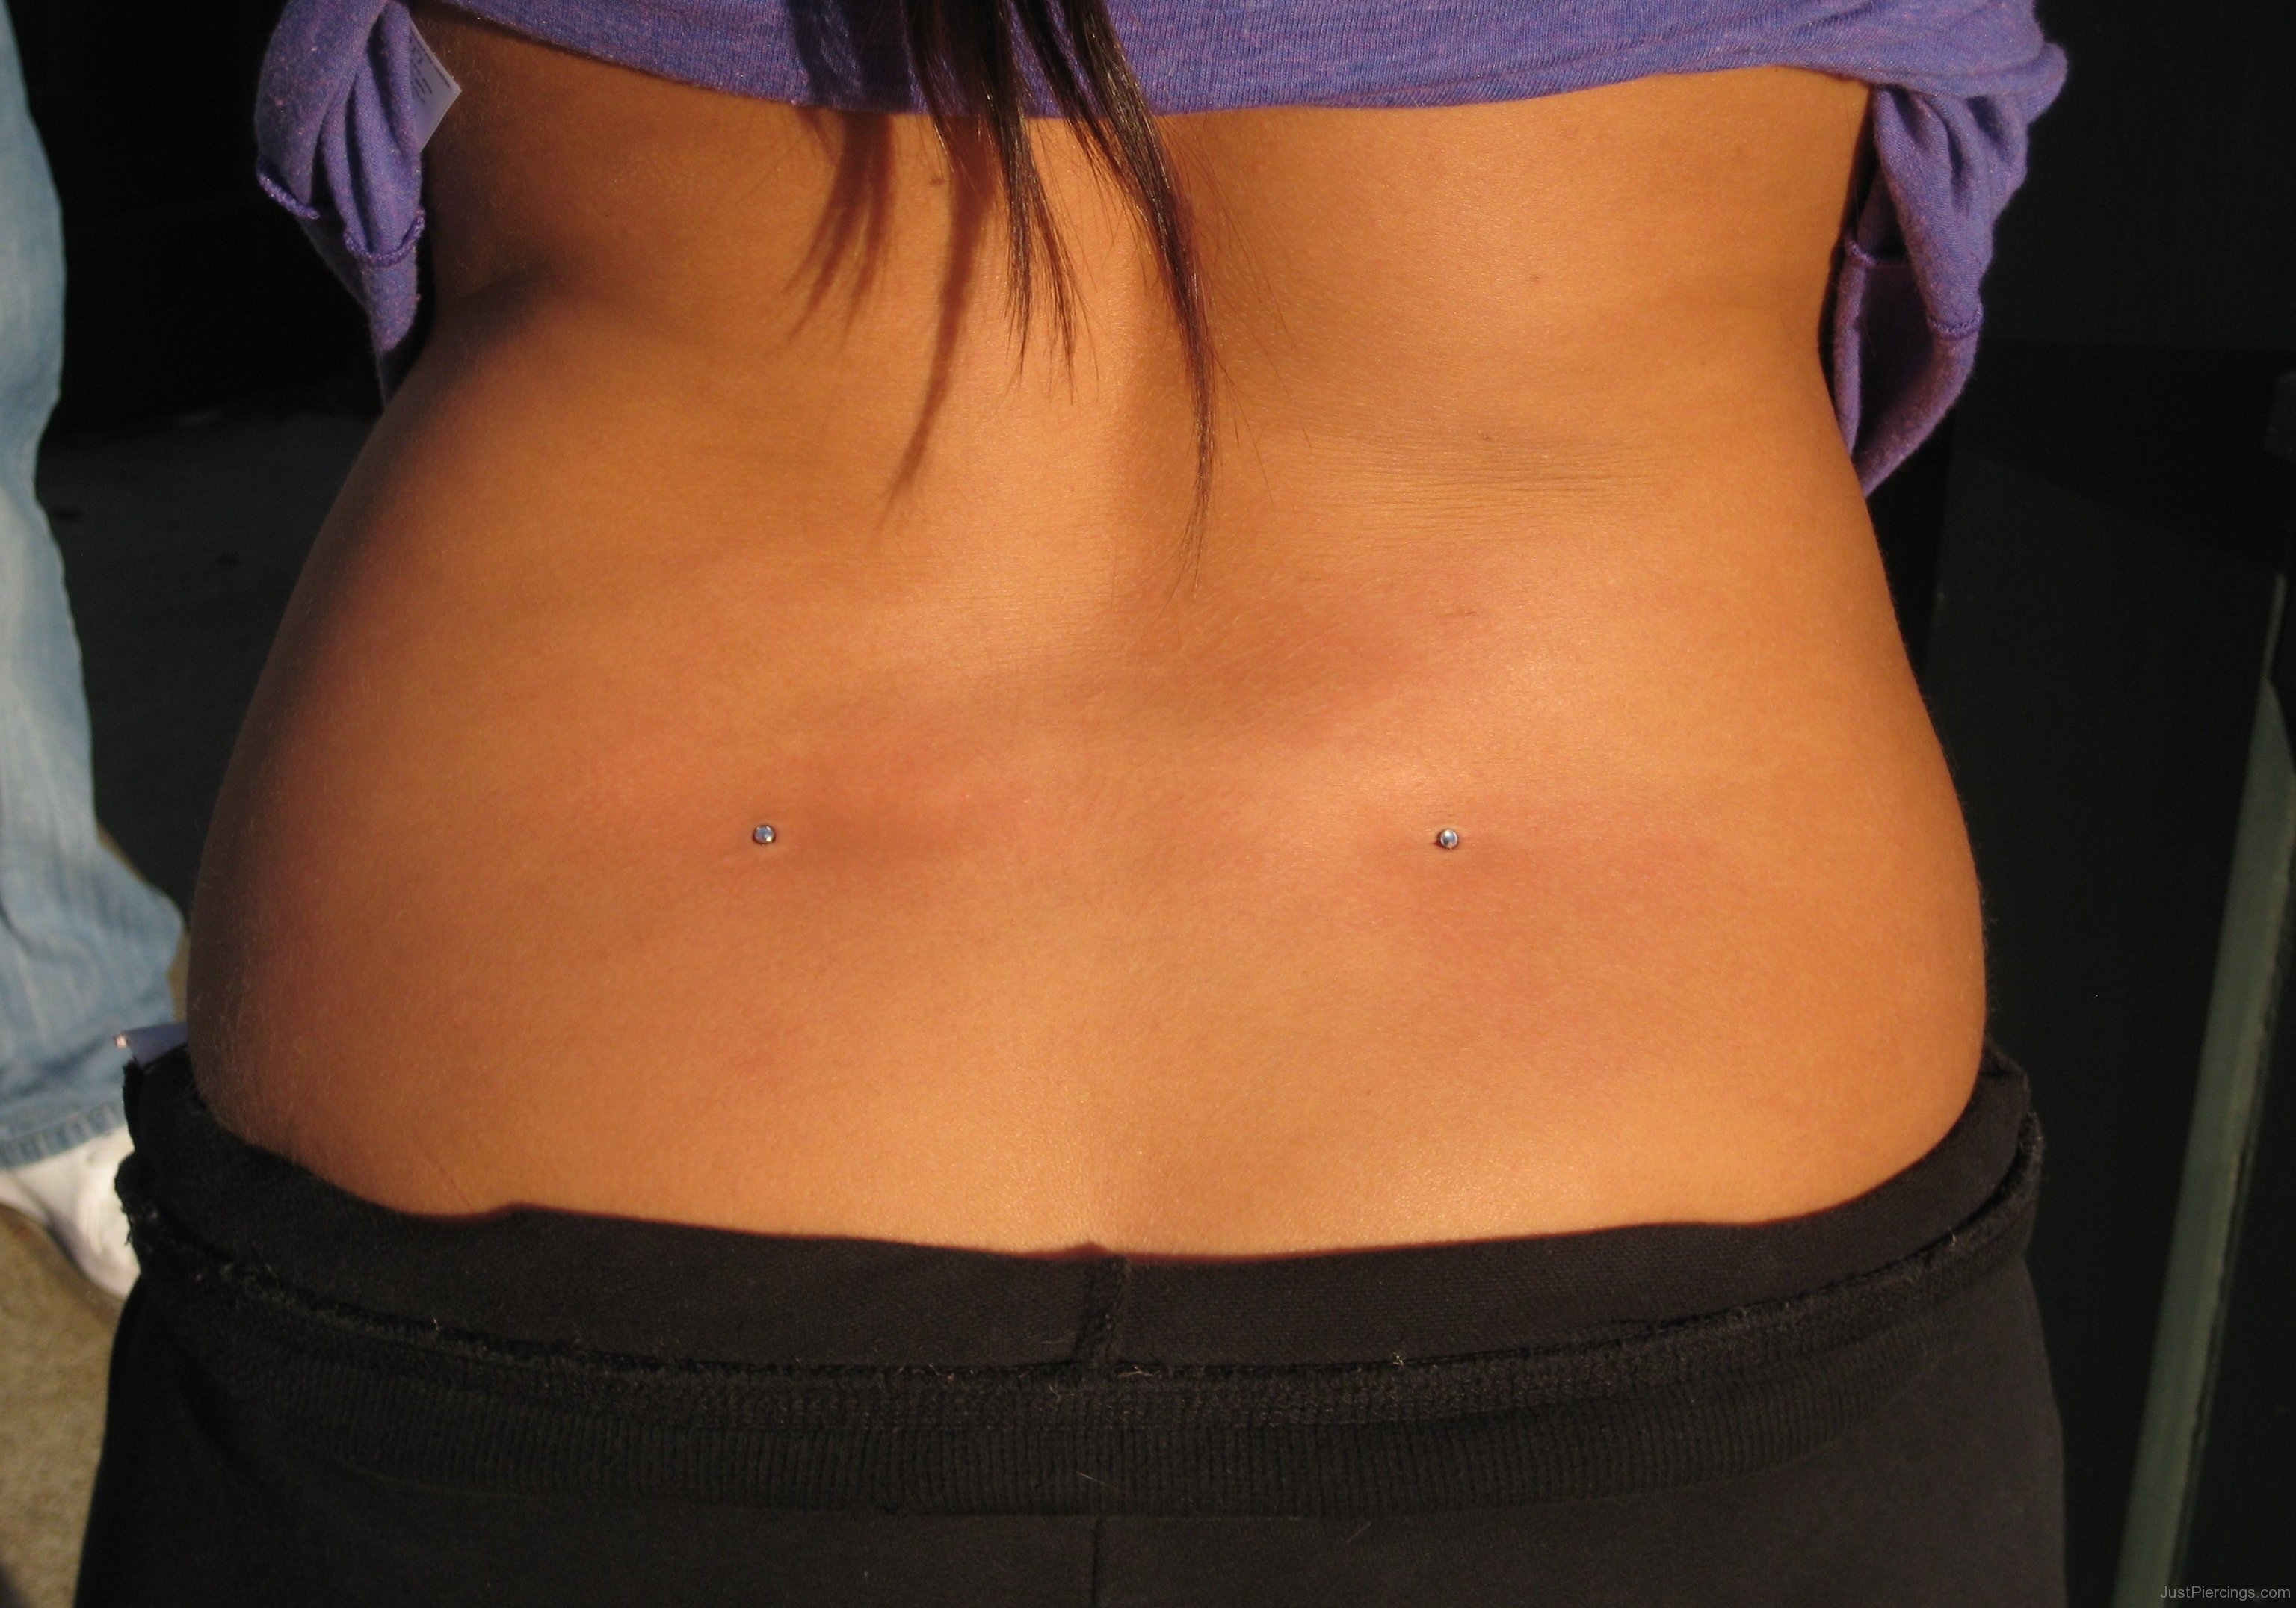 Dimple Back Piercings - Page 12. download. 